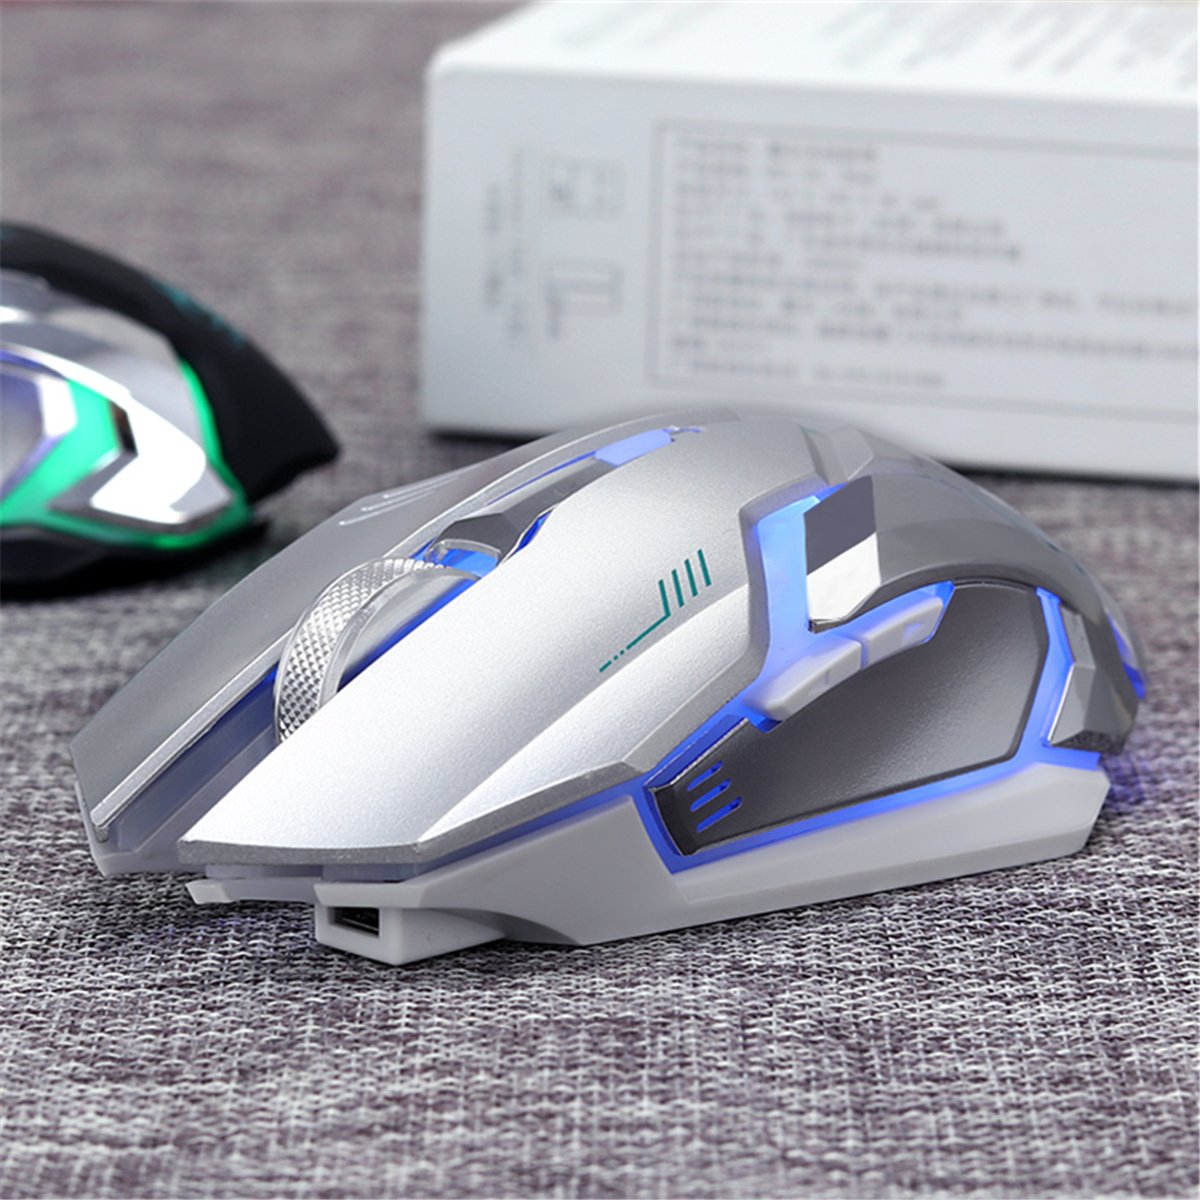 VEGCOO C9s (Updated Version) Wireless Gaming Mouse